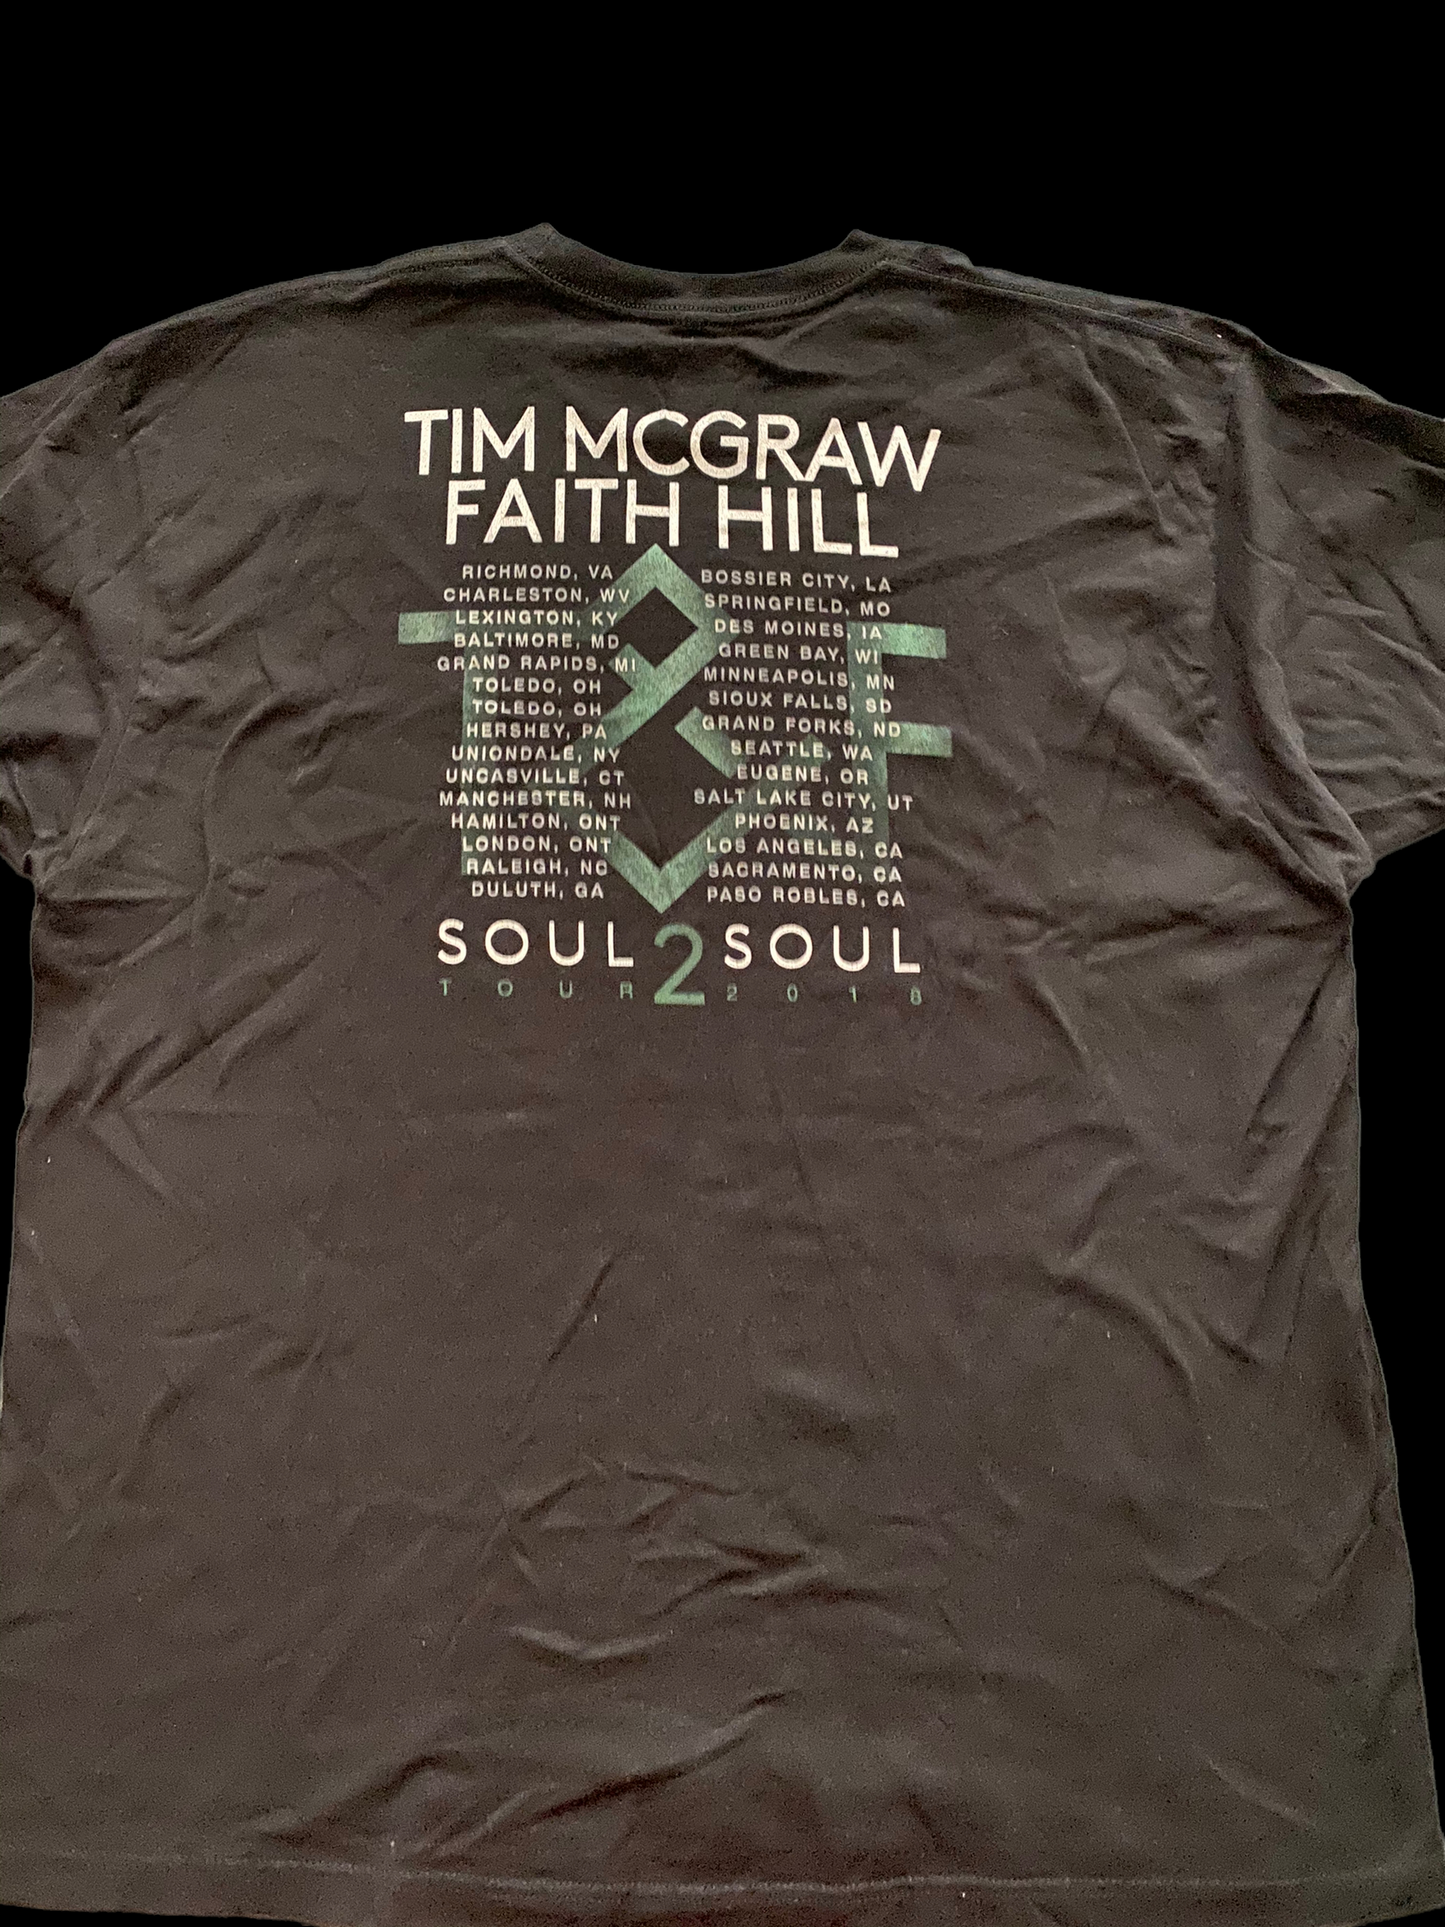 T & F Tim McGraw and Faith Hill 2018 Tour